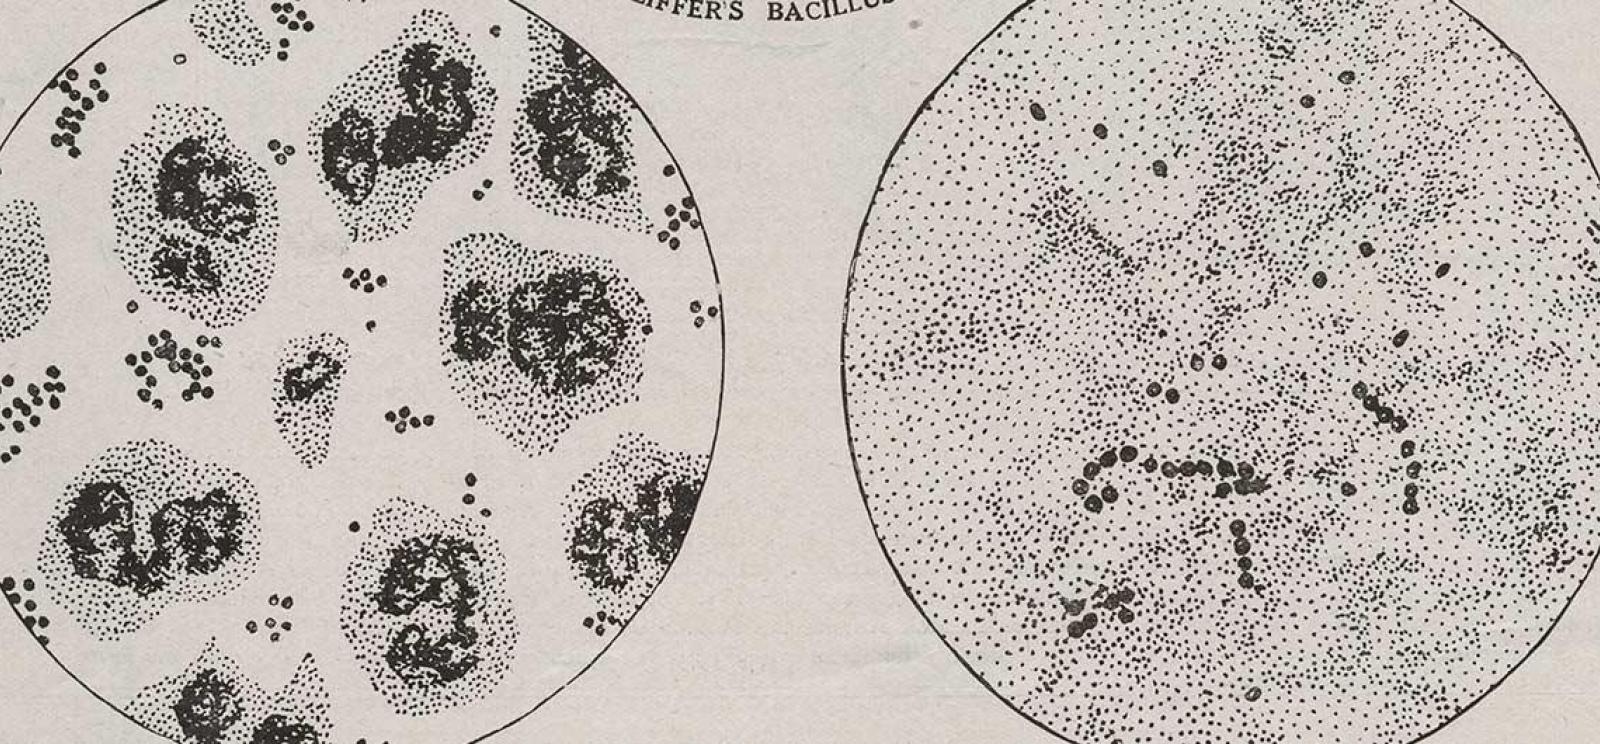 Scan of a page with printed diagrams of microbe cultures under a microscope.